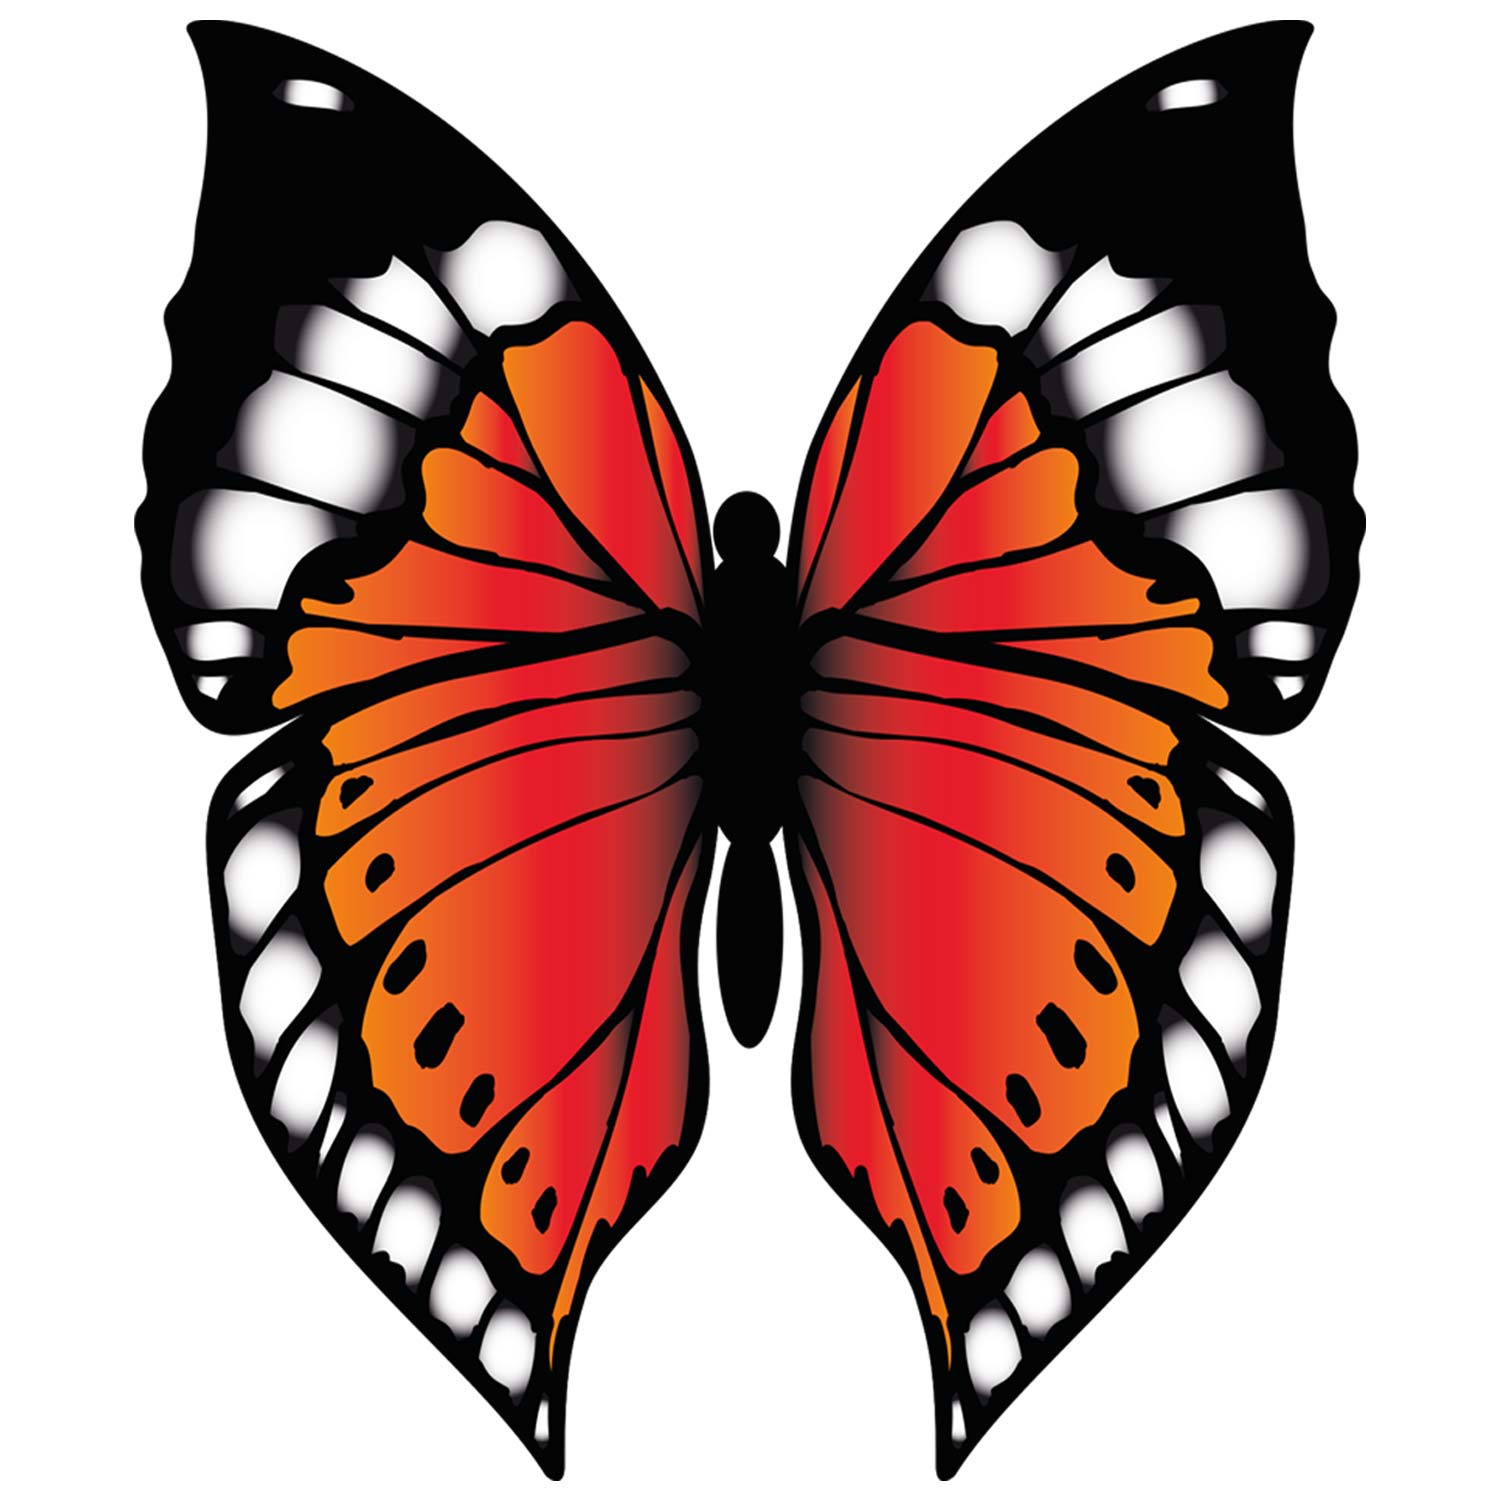 Butterfly-2-Main-Product-Image.